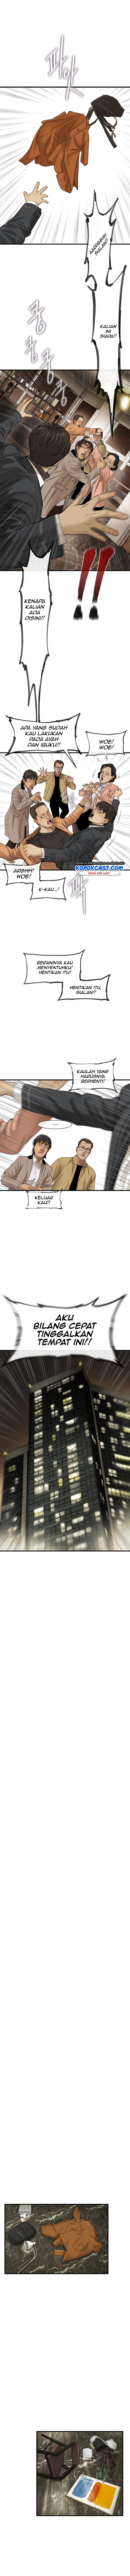 Cell Chapter 01